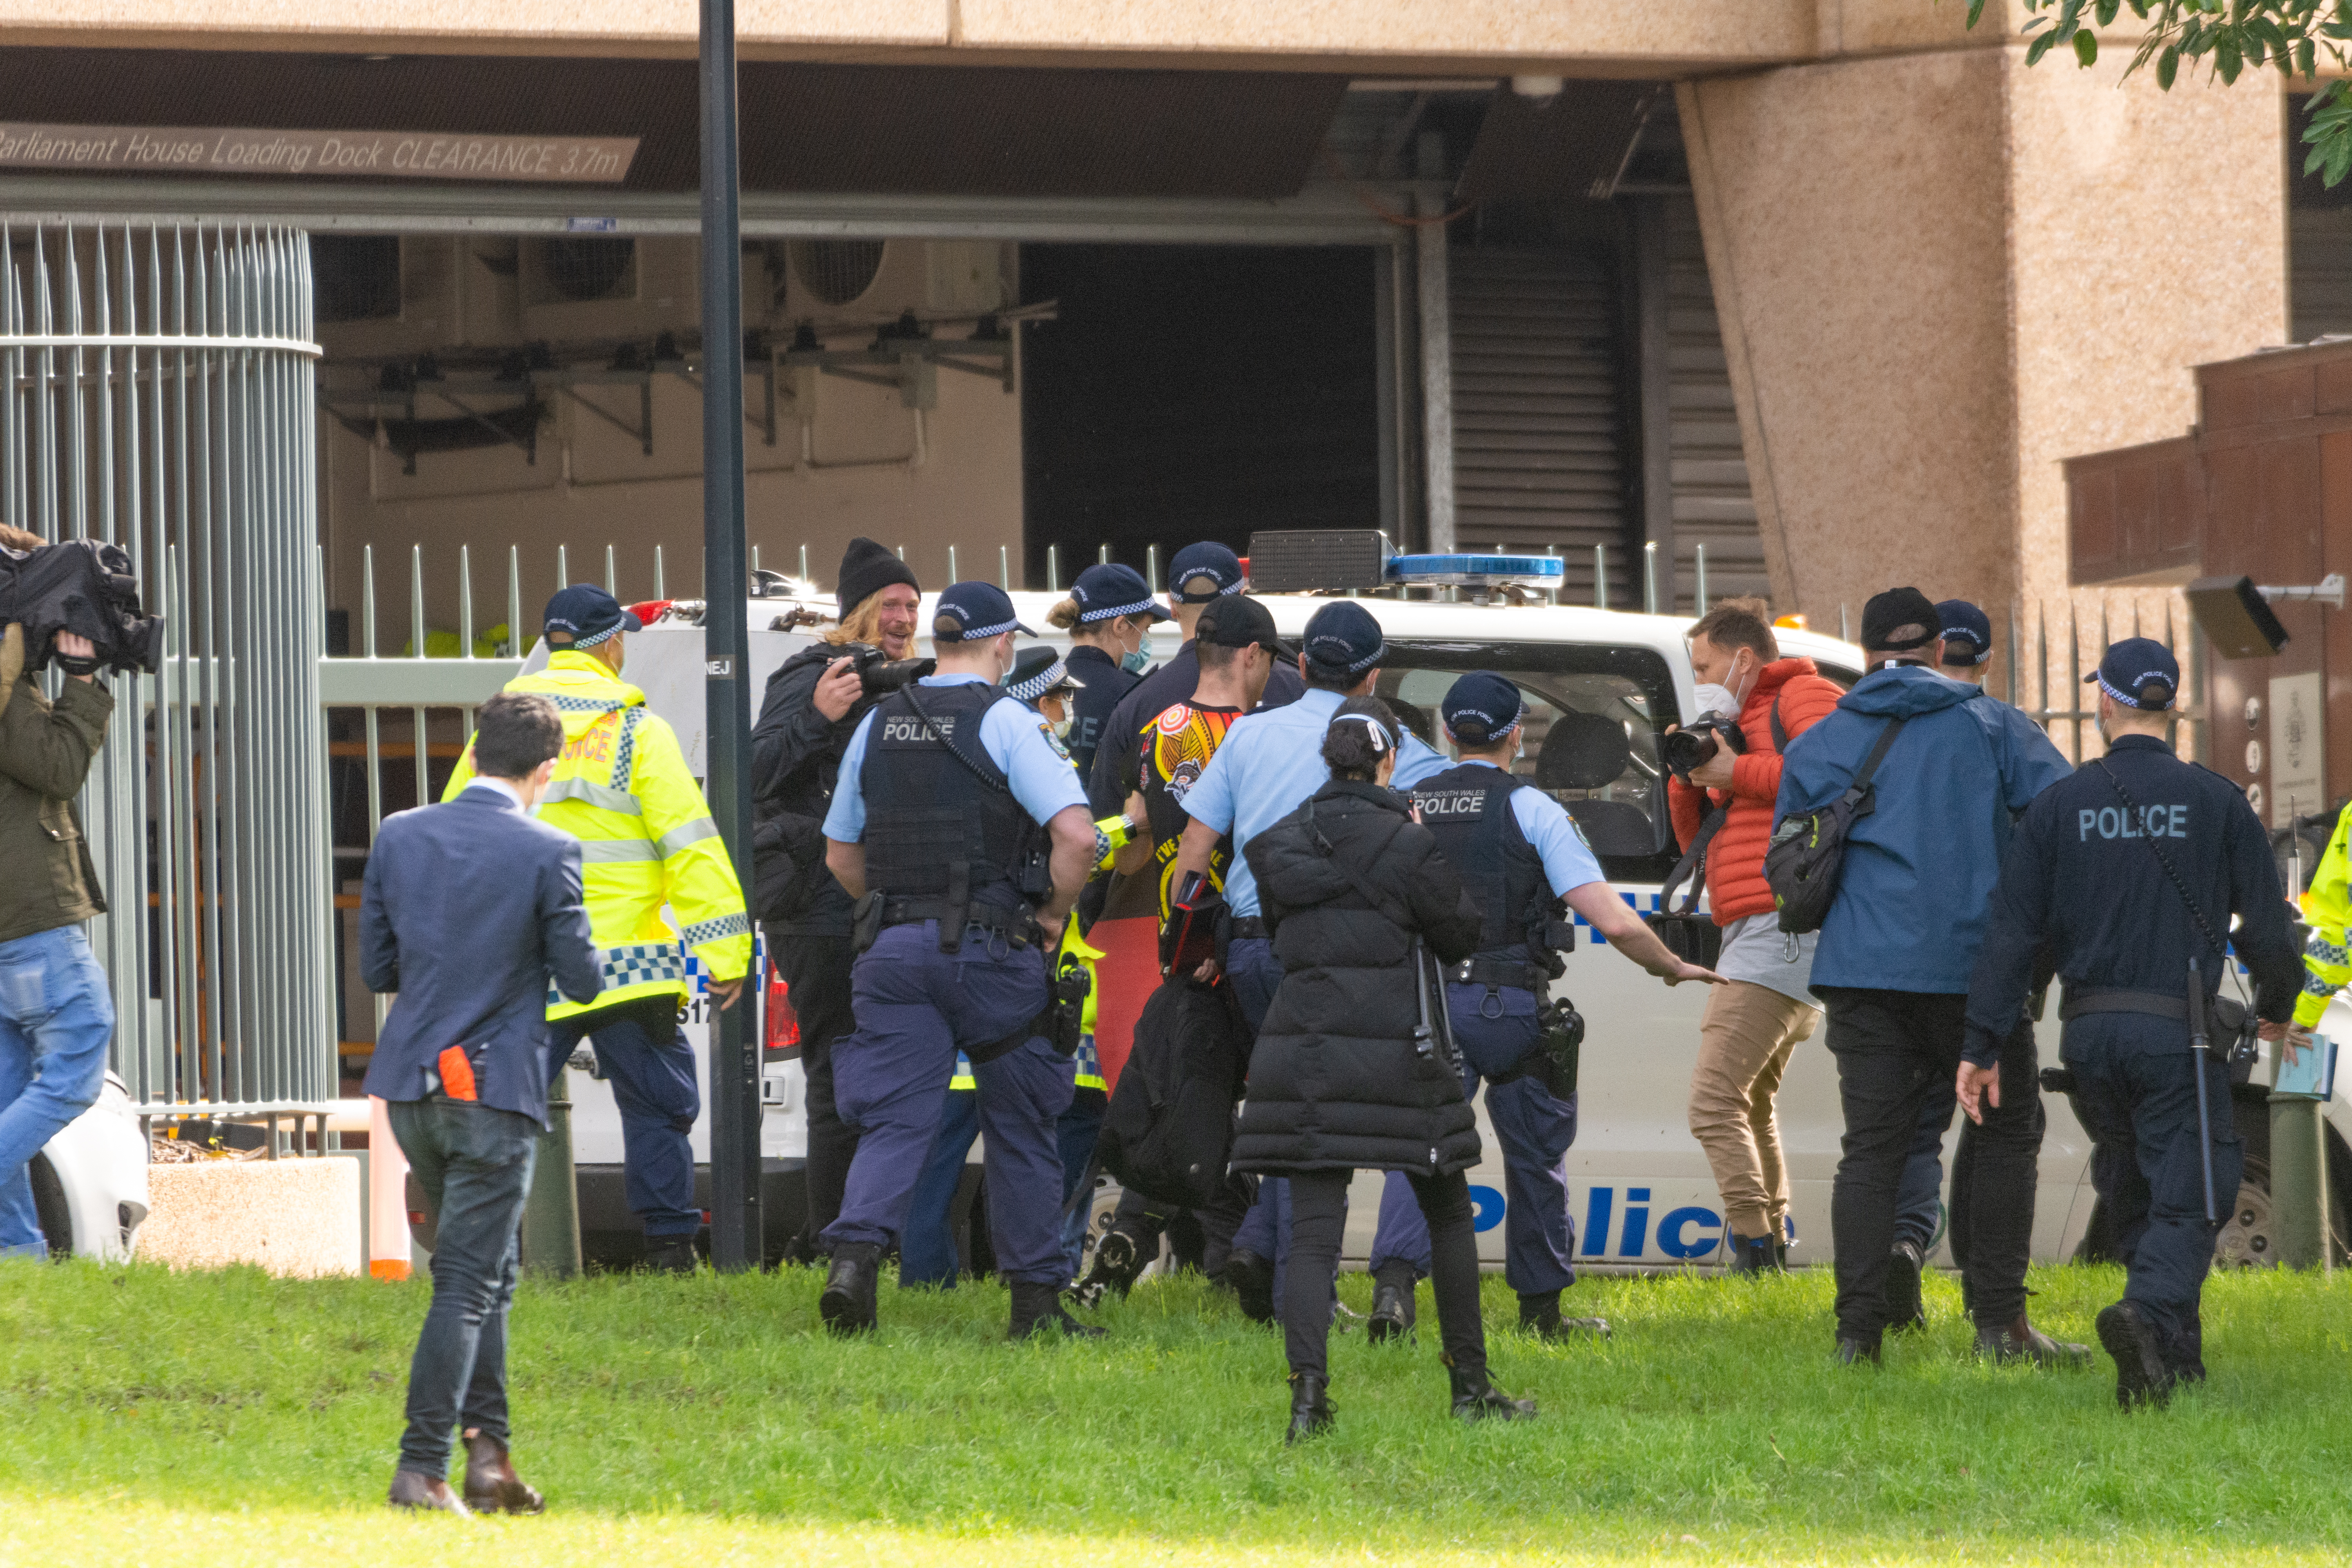 Police Assault Offences in NSW